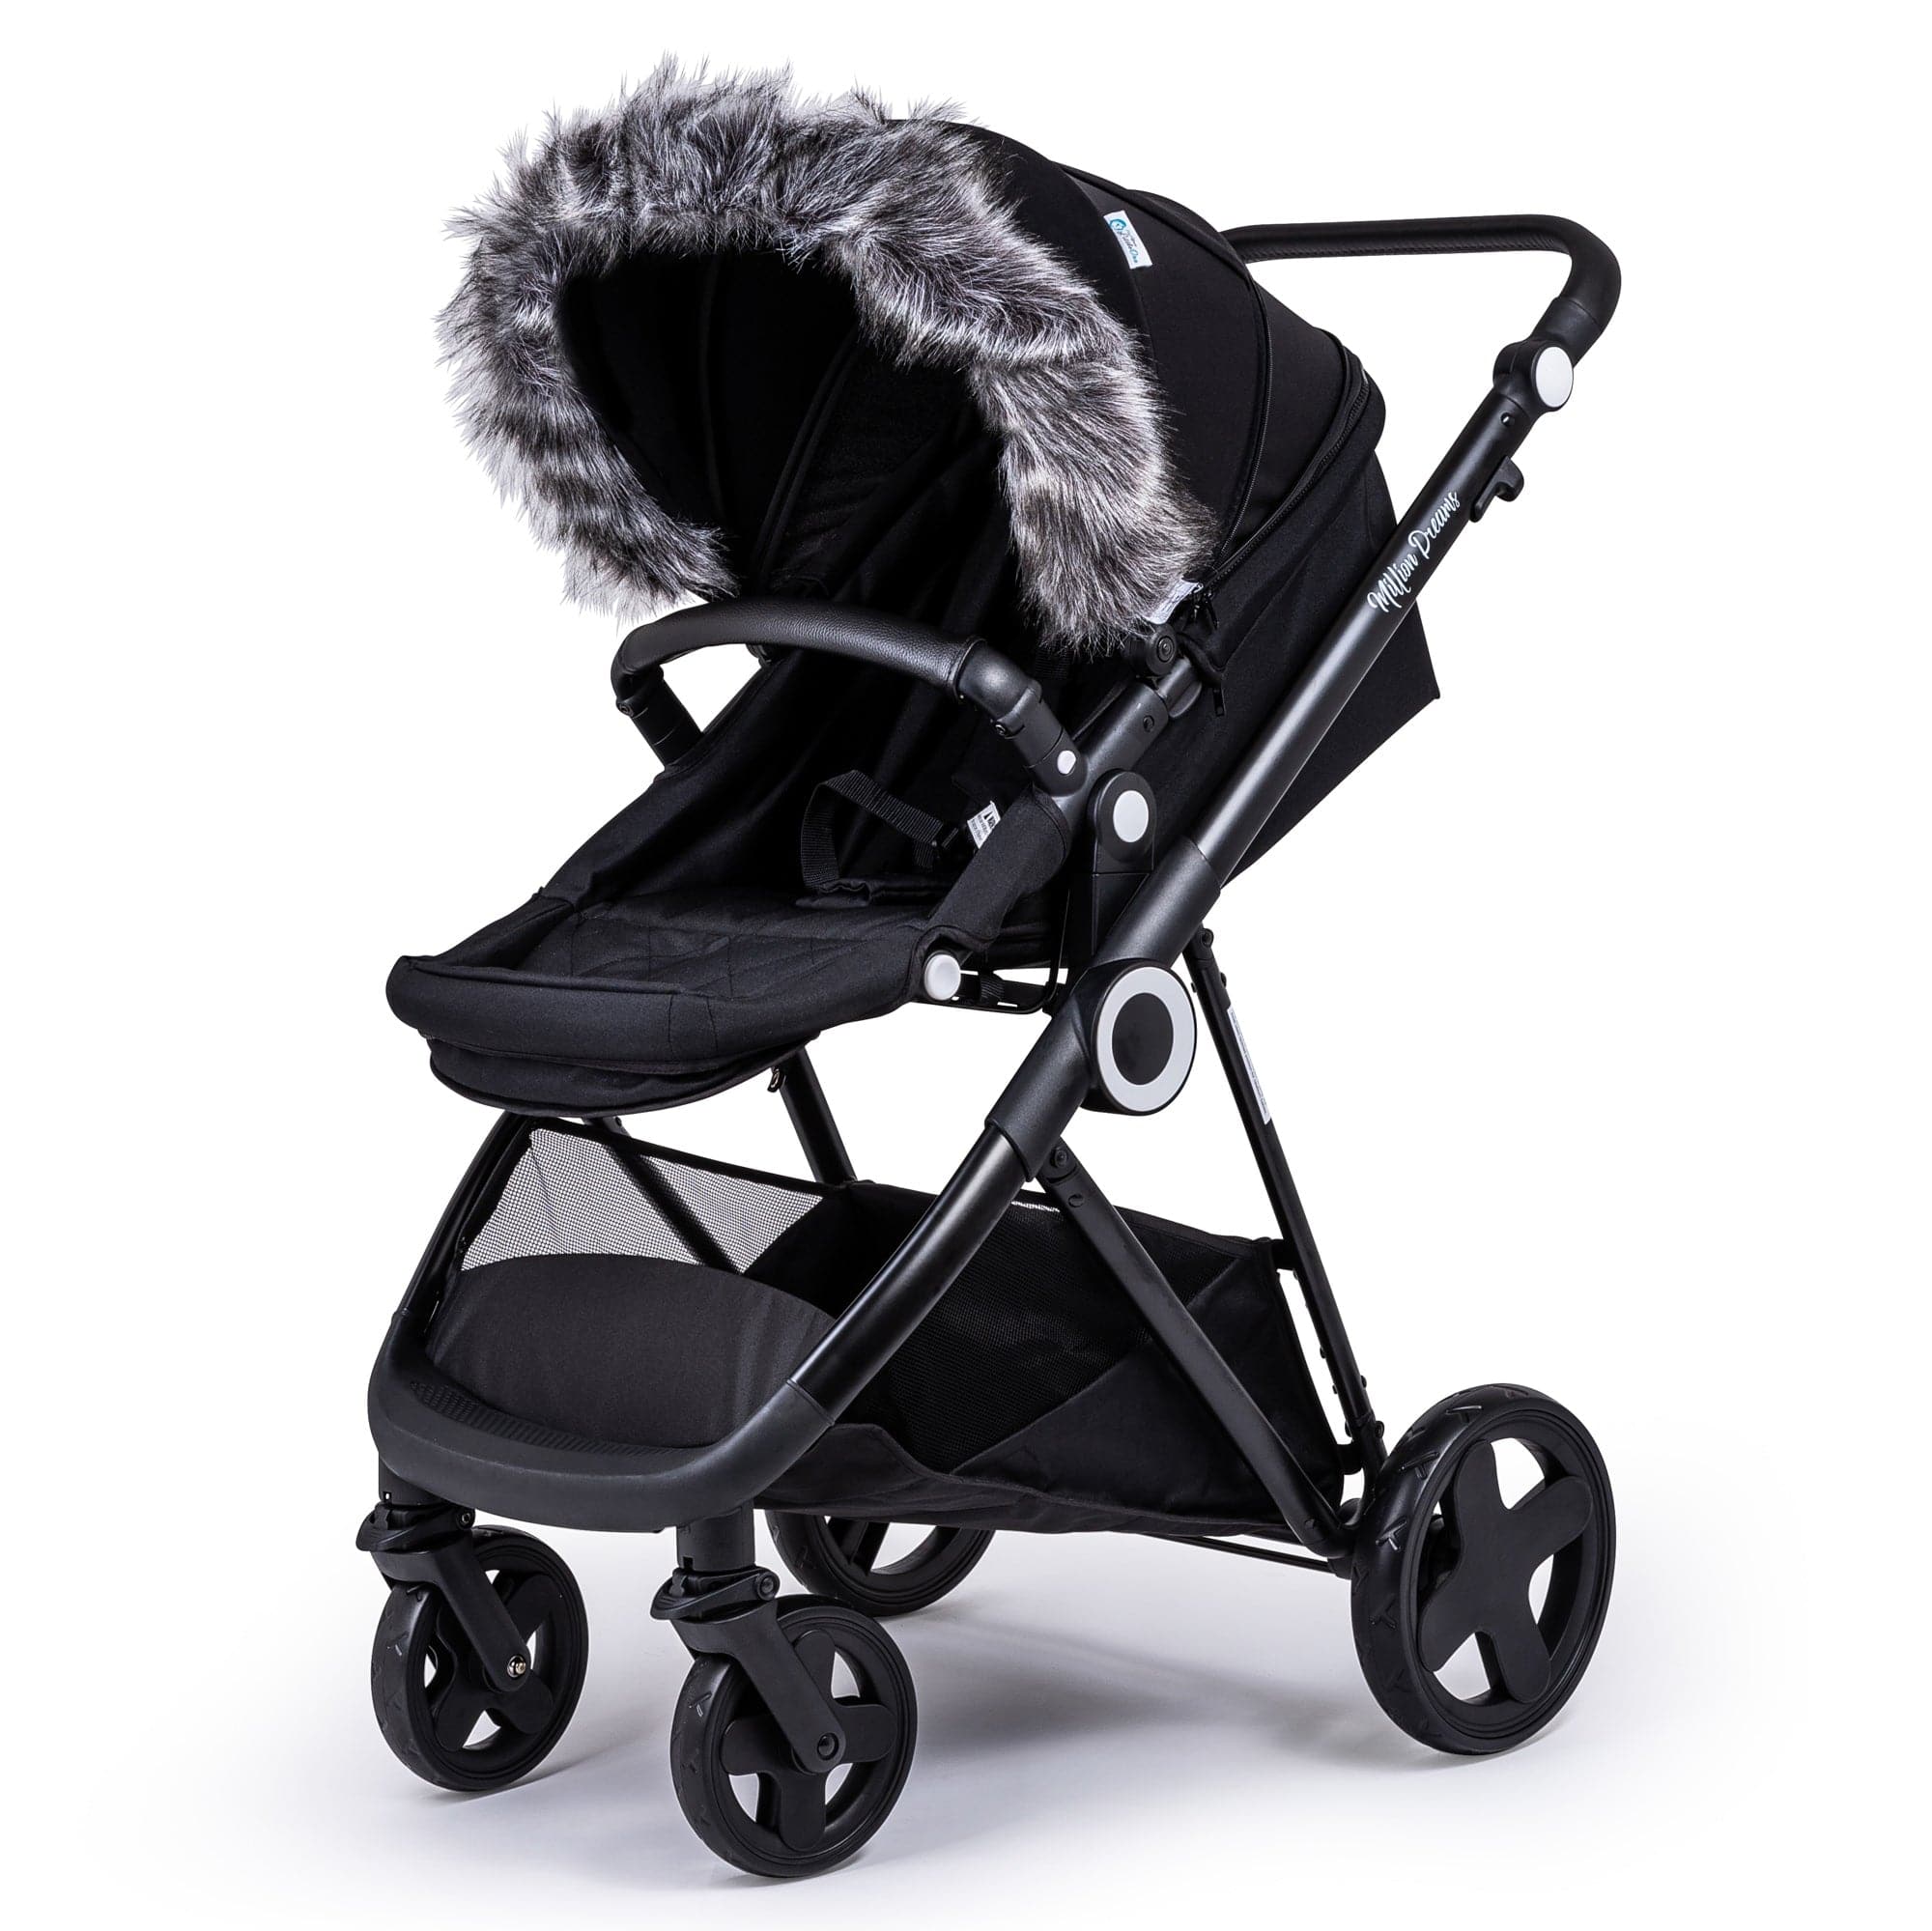 Pram Fur Hood Trim Attachment For Pushchair Compatible with My Child - Dark Grey / Fits All Models | For Your Little One